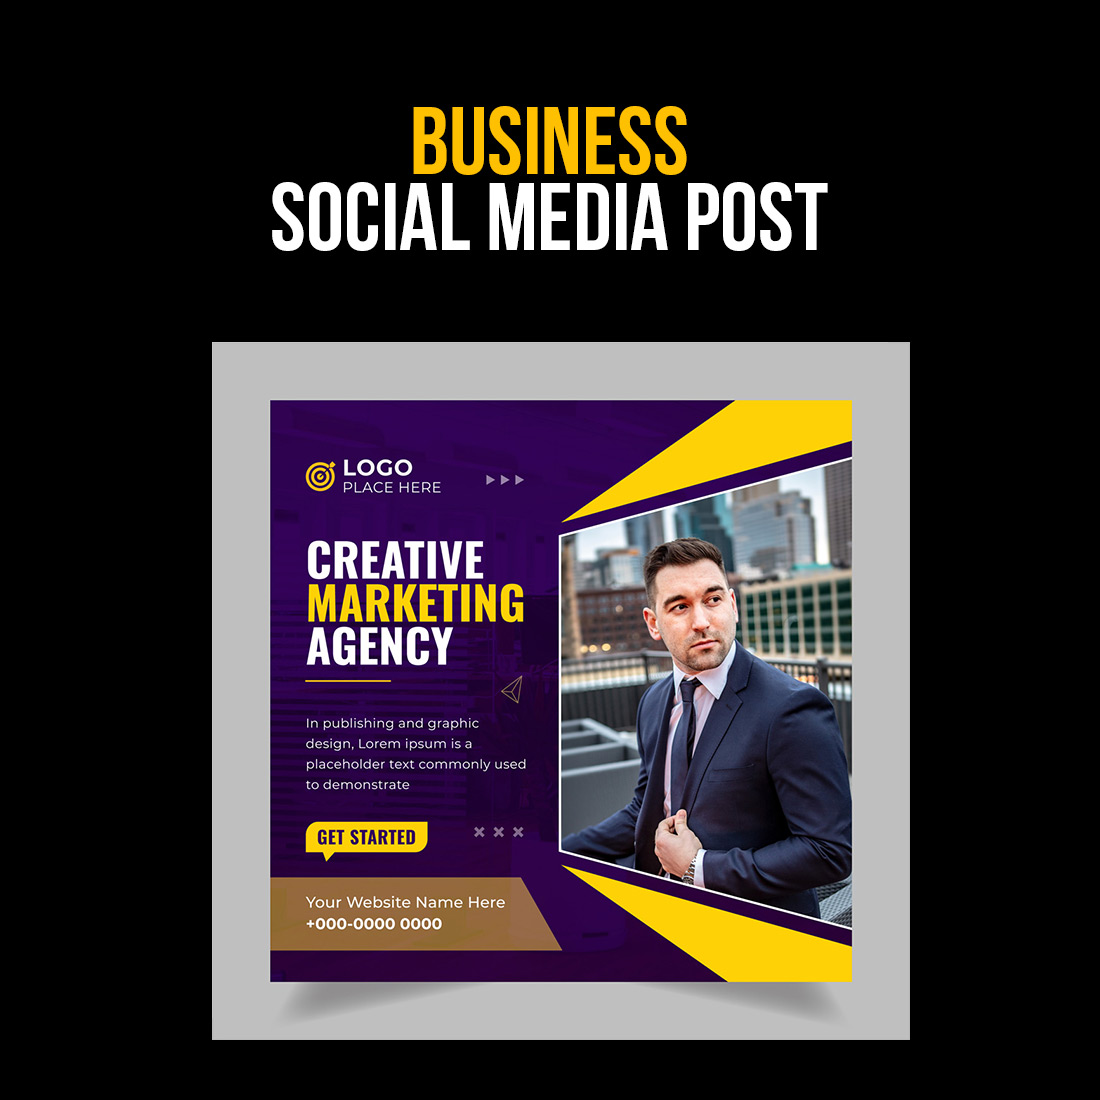 Business social media postcard with a man in a suit.